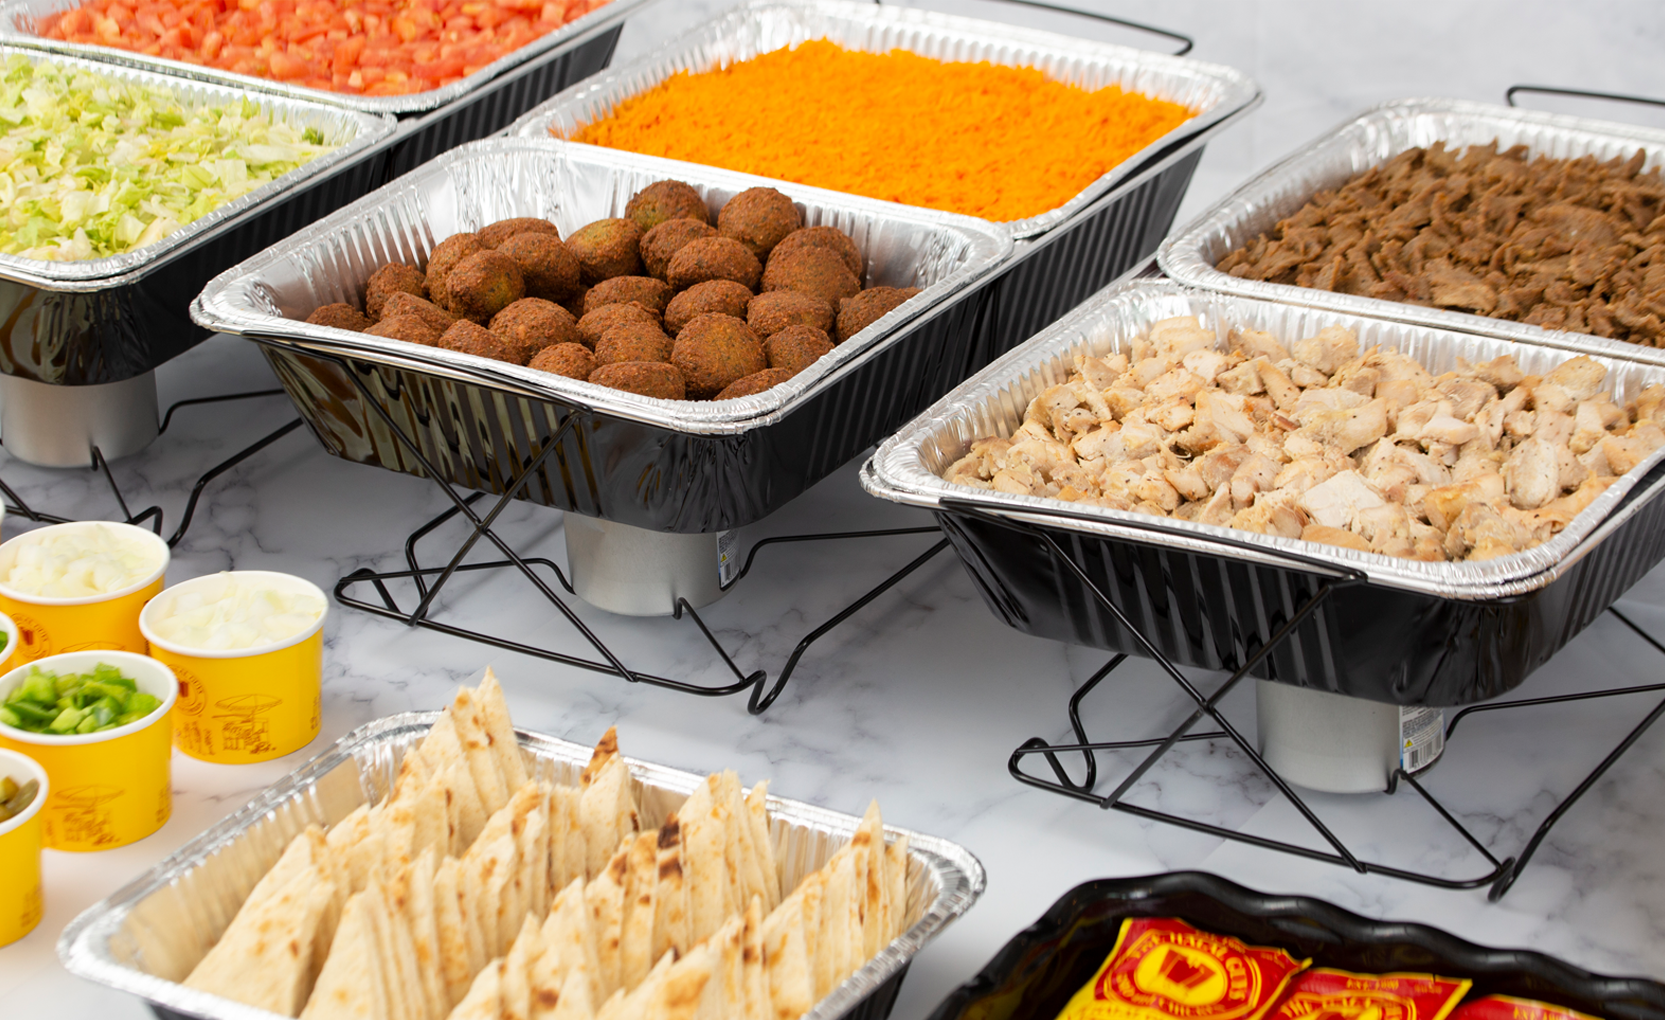 https://thehalalguys.com/wp-content/uploads/2022/07/Catering-2.png